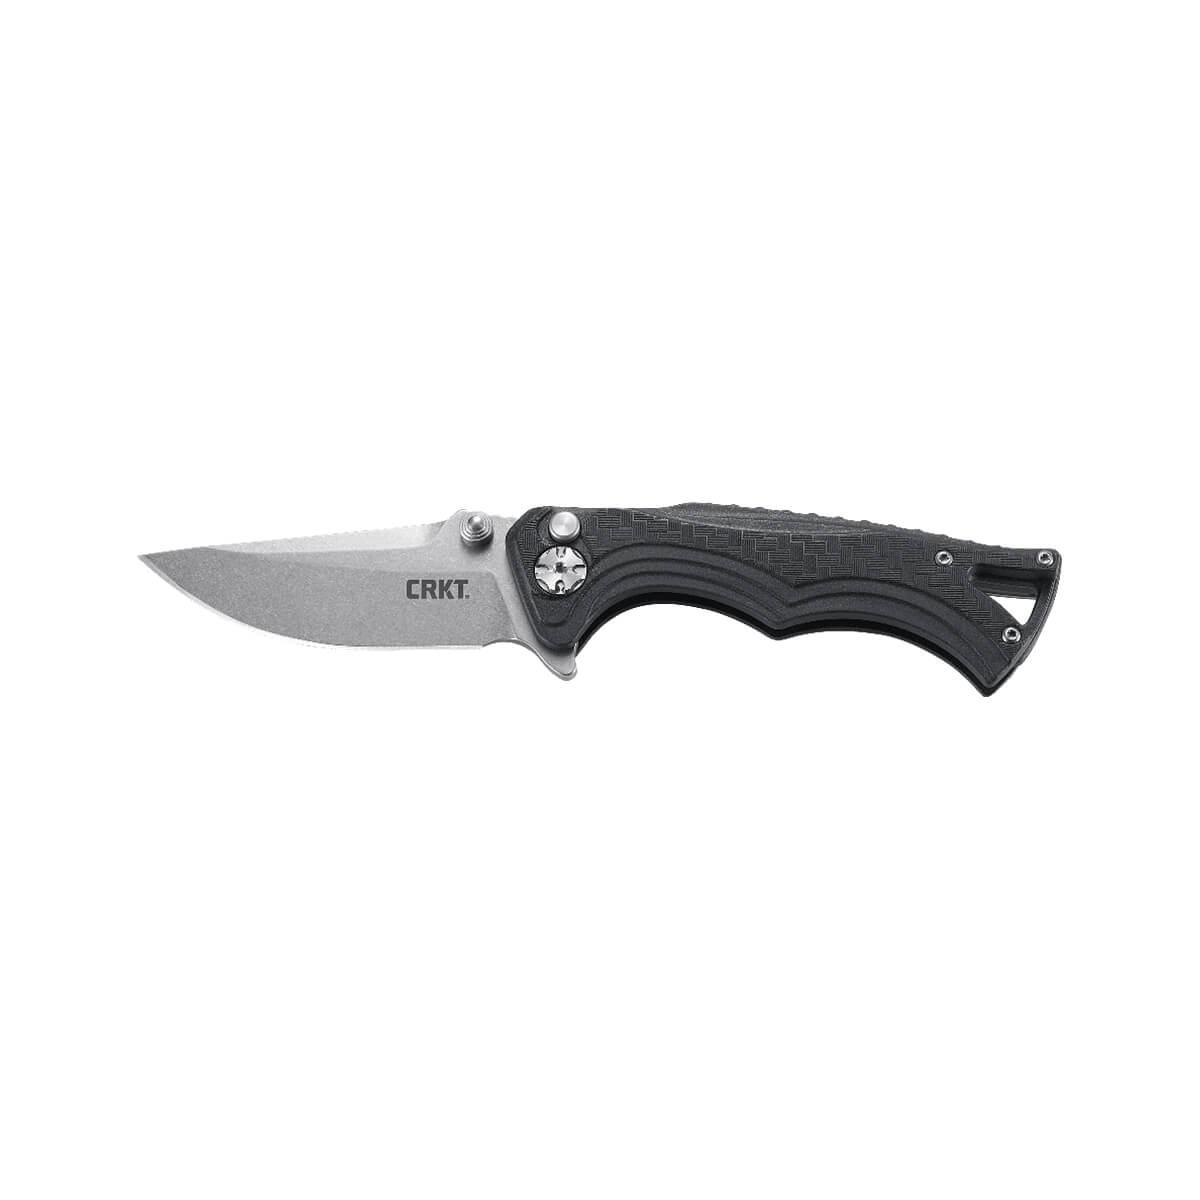  Bt Fighter Compact Knife